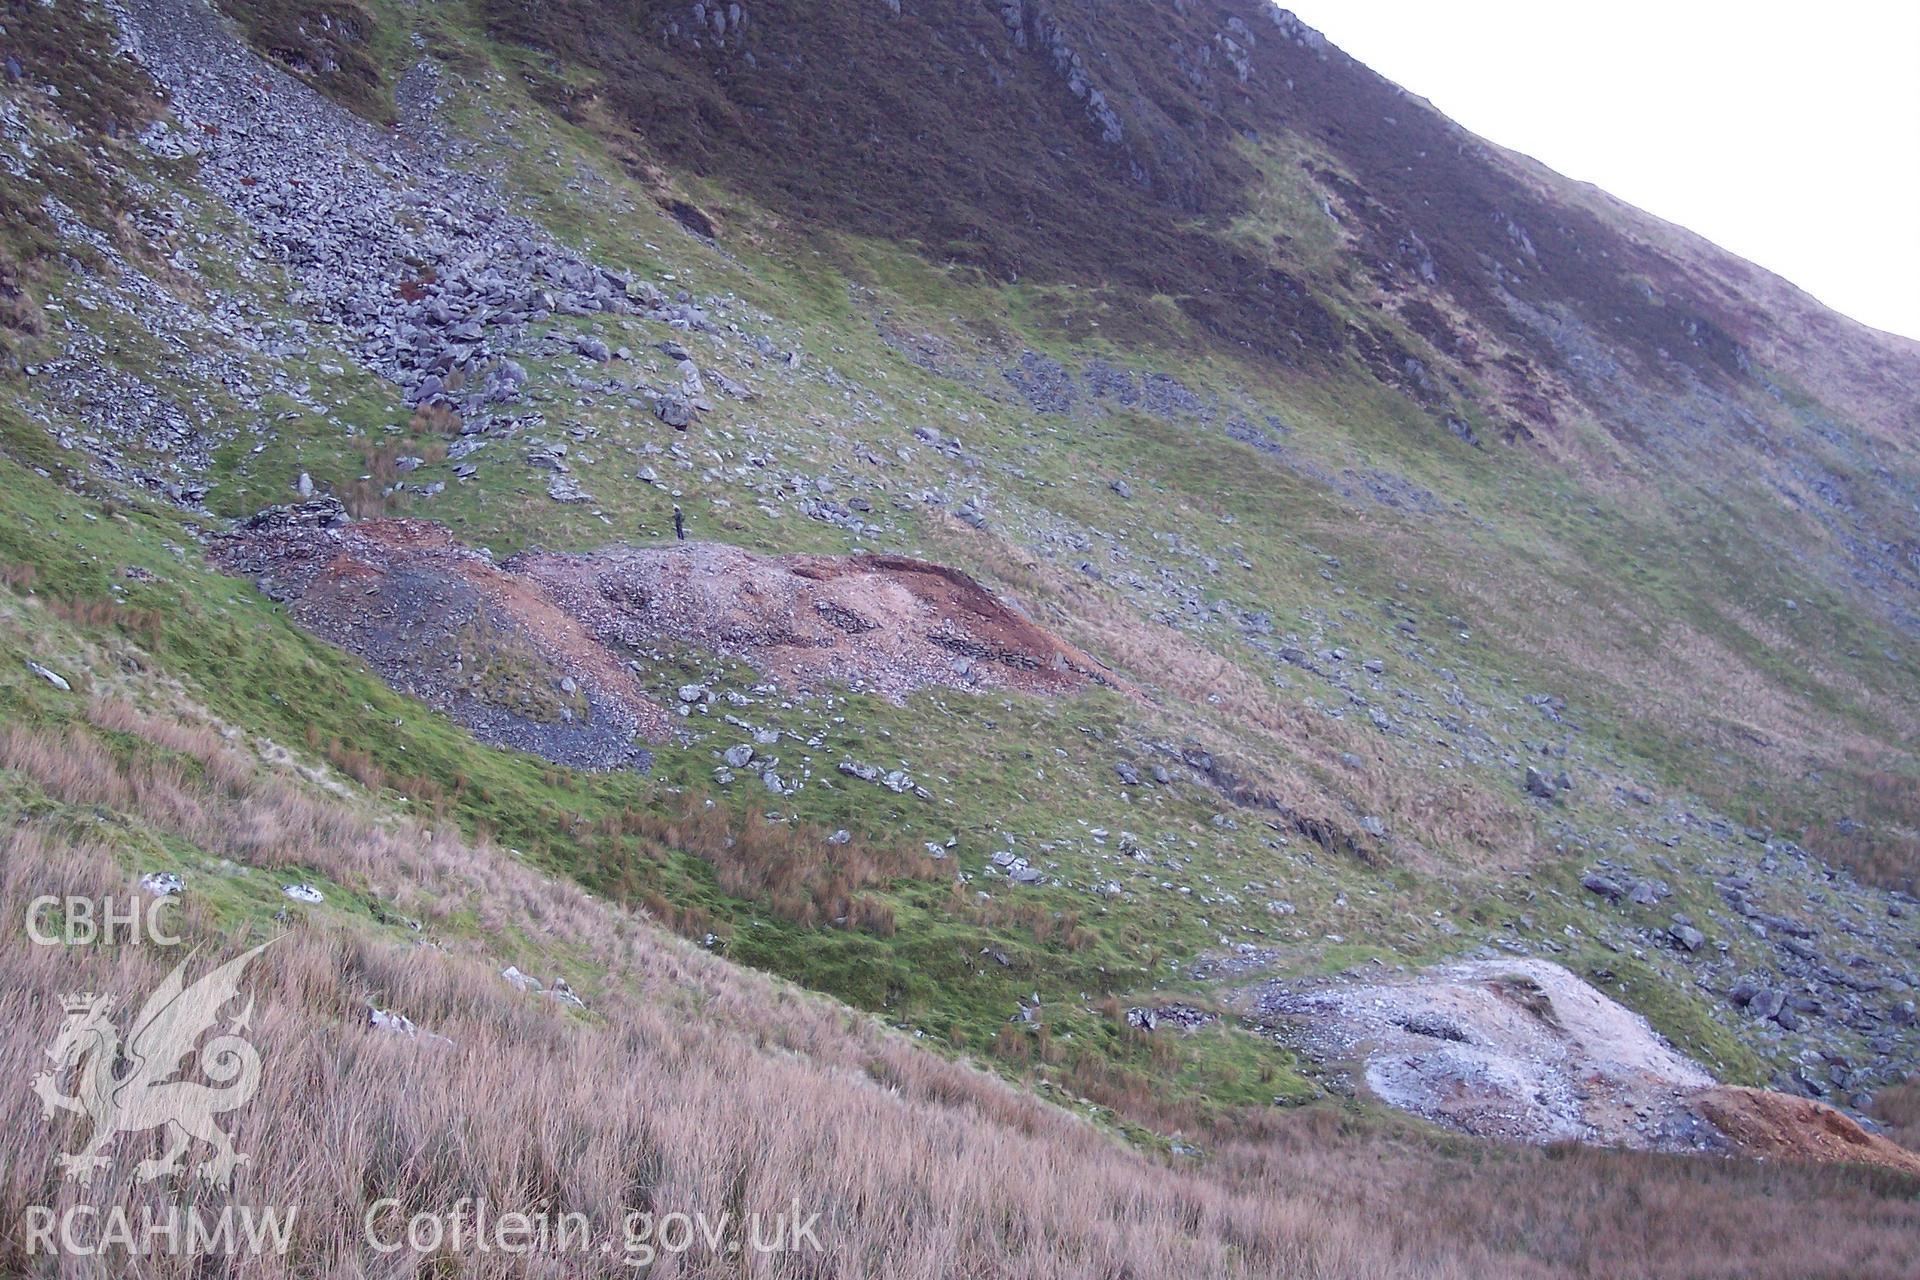 Photograph of Mynydd Tal-y-mignedd Trial Mine I taken on 04/01/2006 by P.J. Schofield during an Upland Survey undertaken by Oxford Archaeology North.